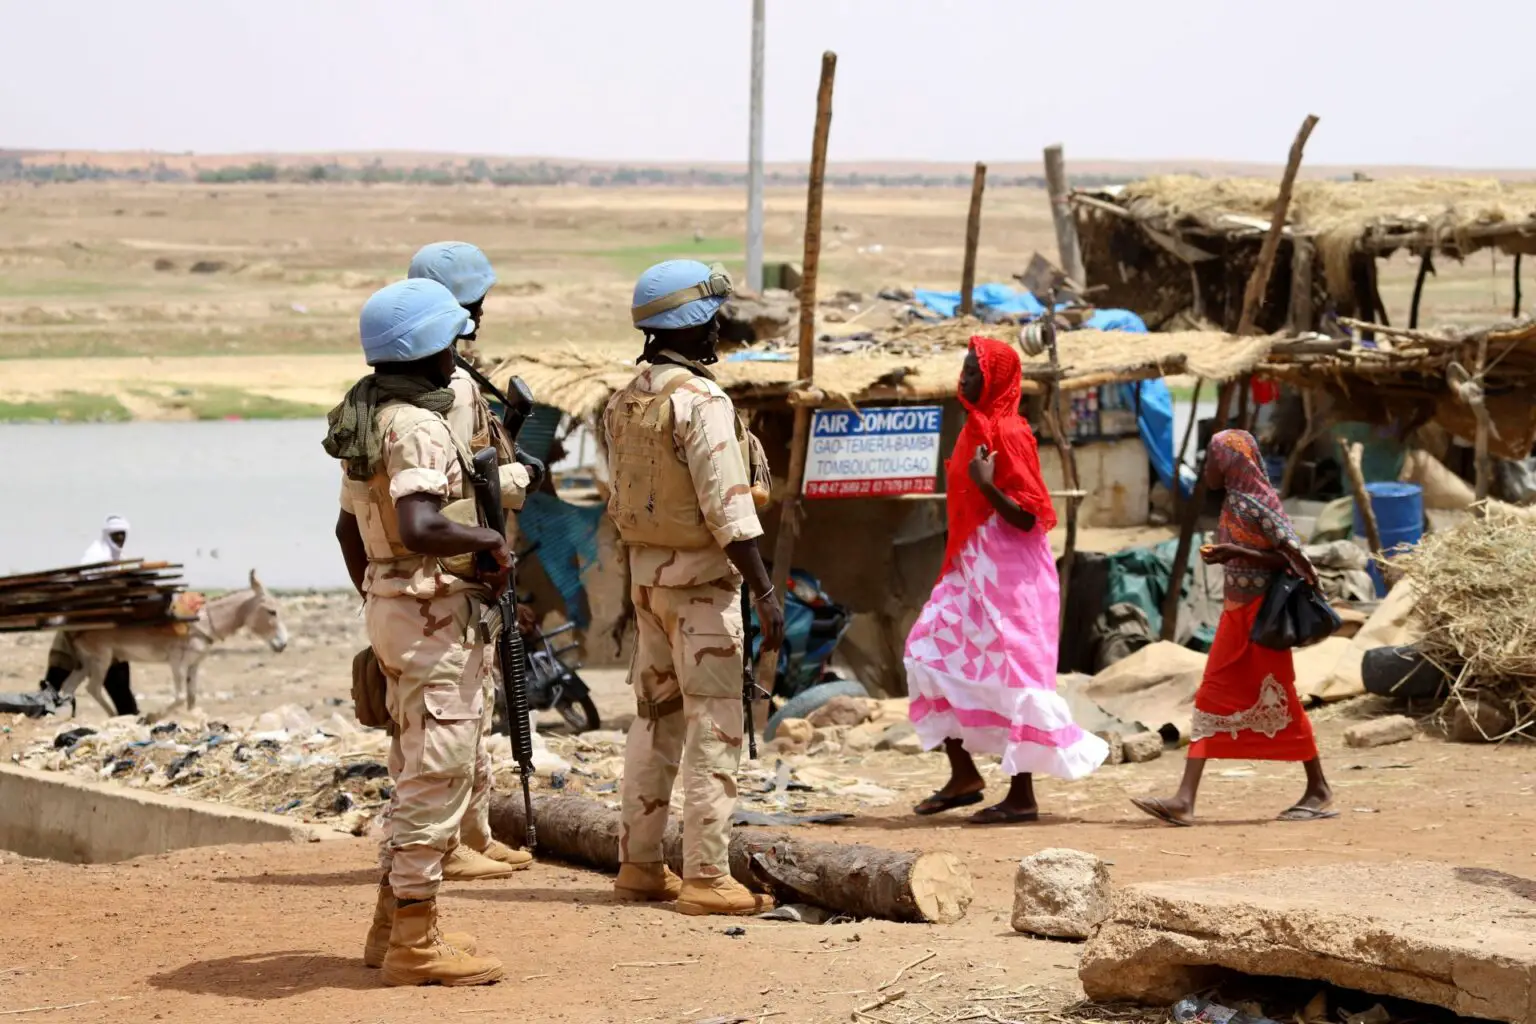 UN force in Mali quits new base over insecurity